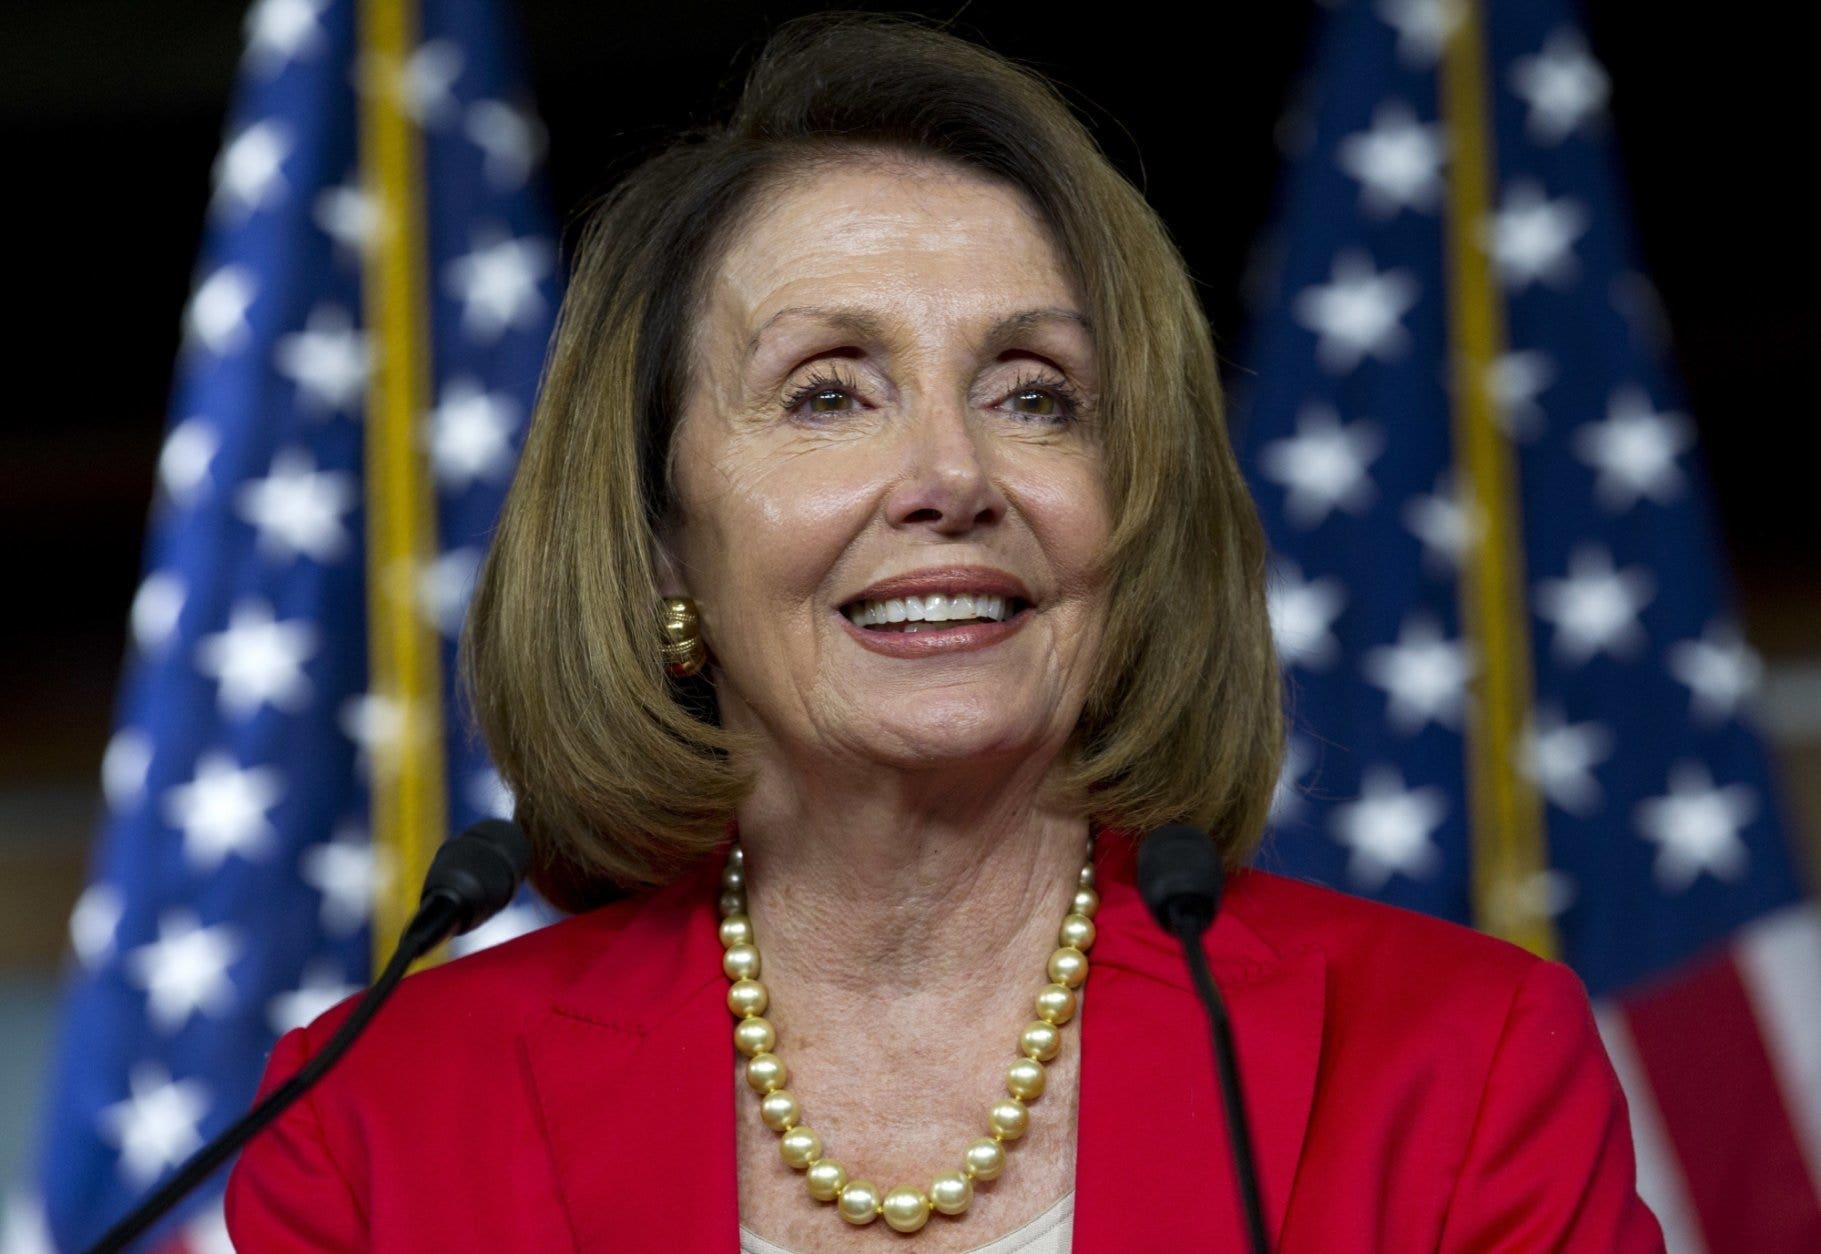 Twitter silently after Pelosi’s tweet declaring that the 2016 election was “hijacked” resurfaces